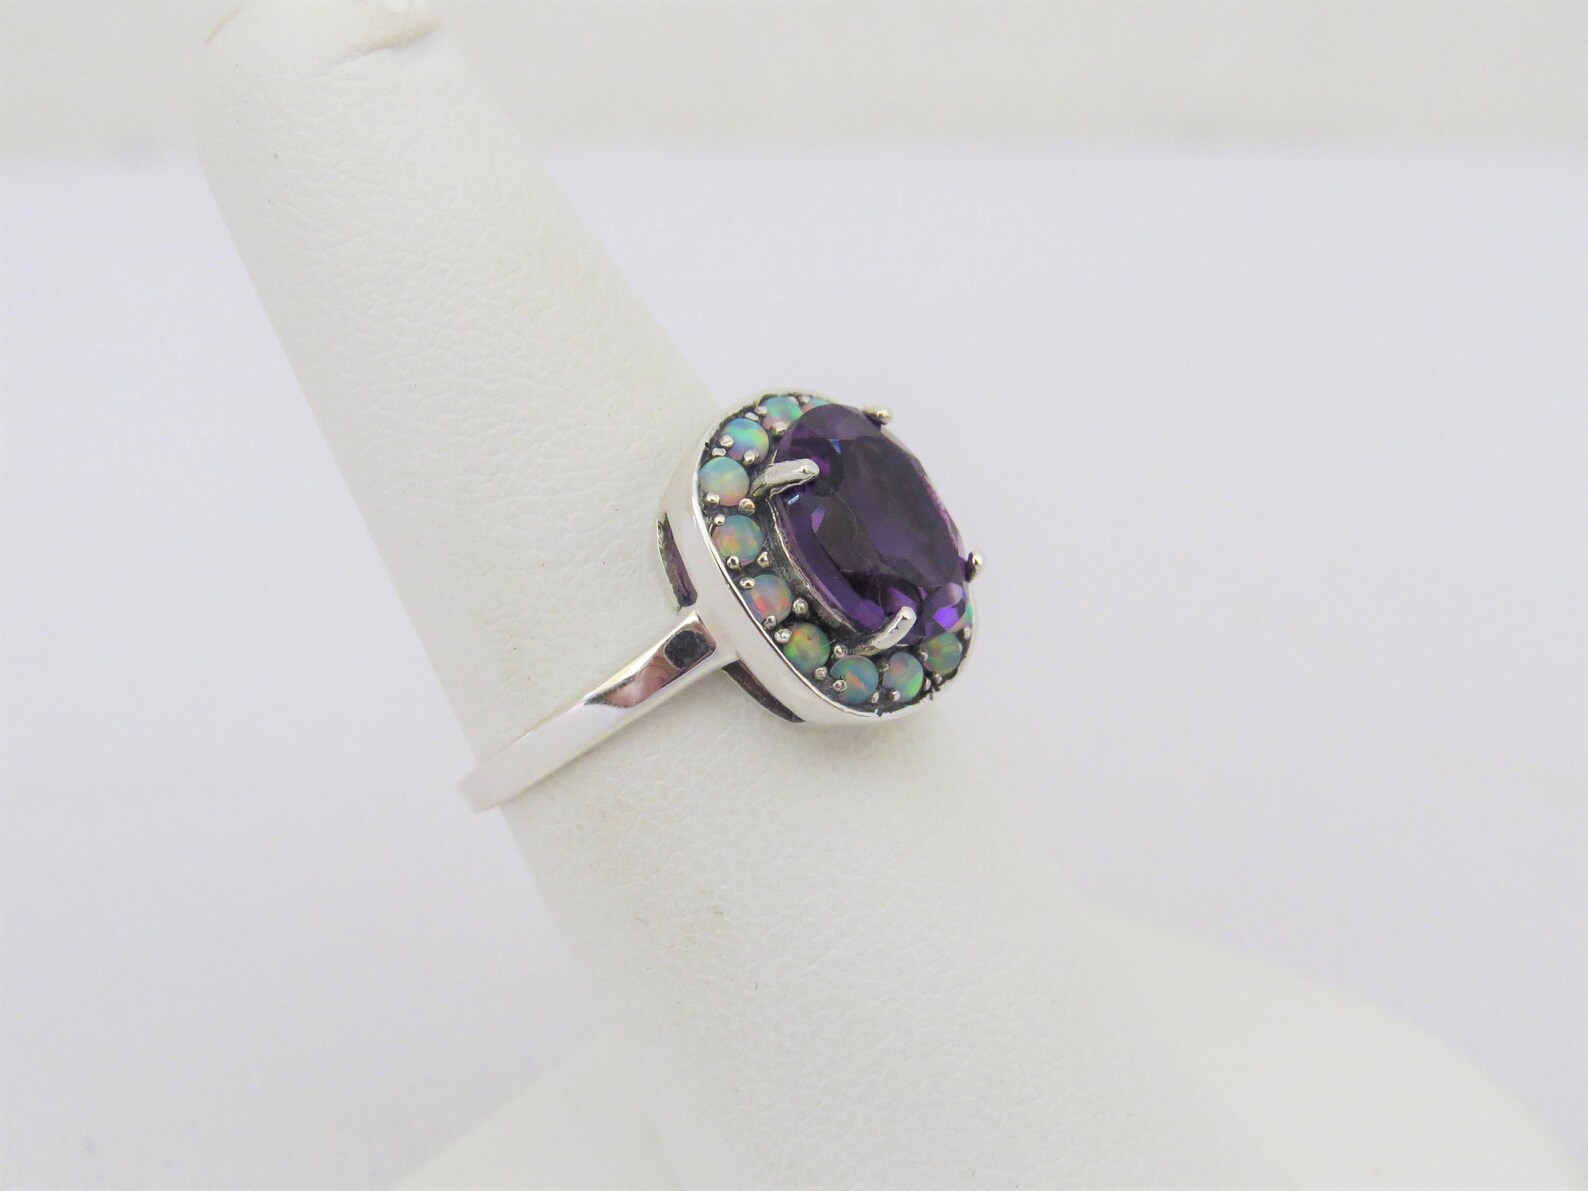 Vintage Sterling Silver Amethyst & White Opal Halo Ring Size 9 - Etsy